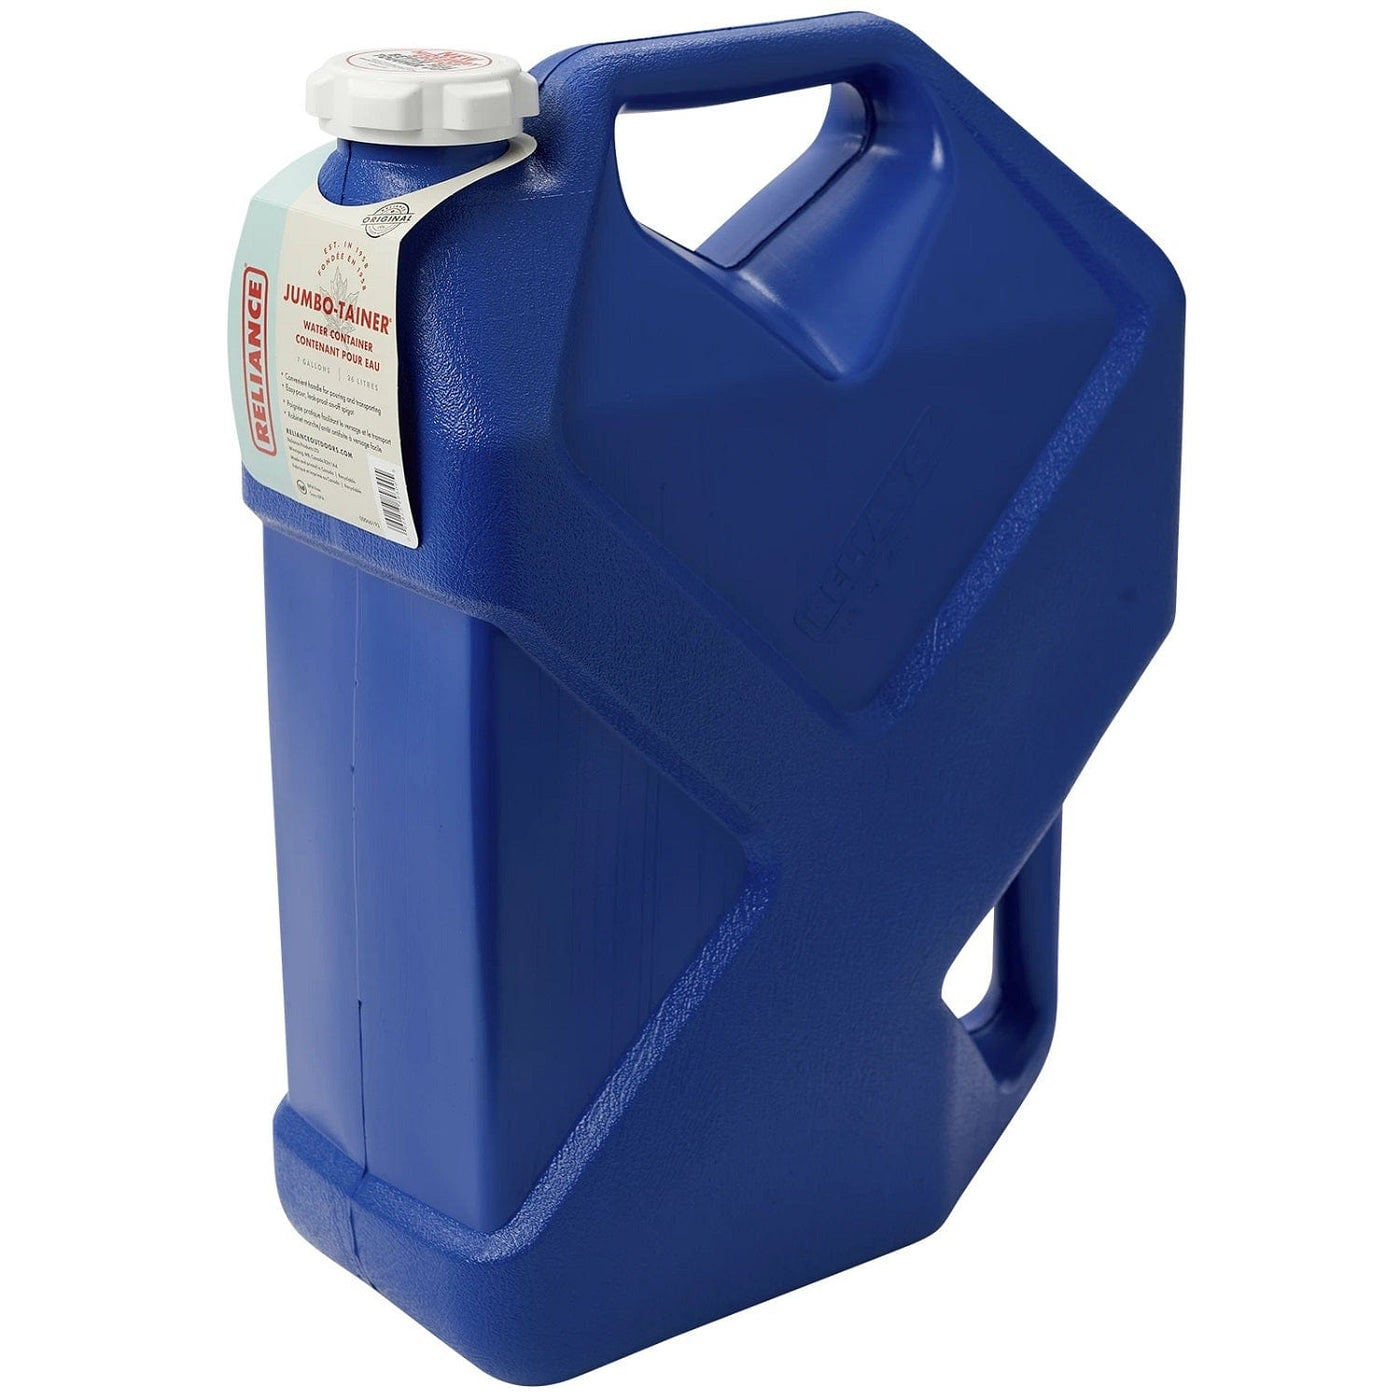 Reliance Reliance Jumbo-Tainer 2.0 Water Container 7 Gallon Camping And Outdoor